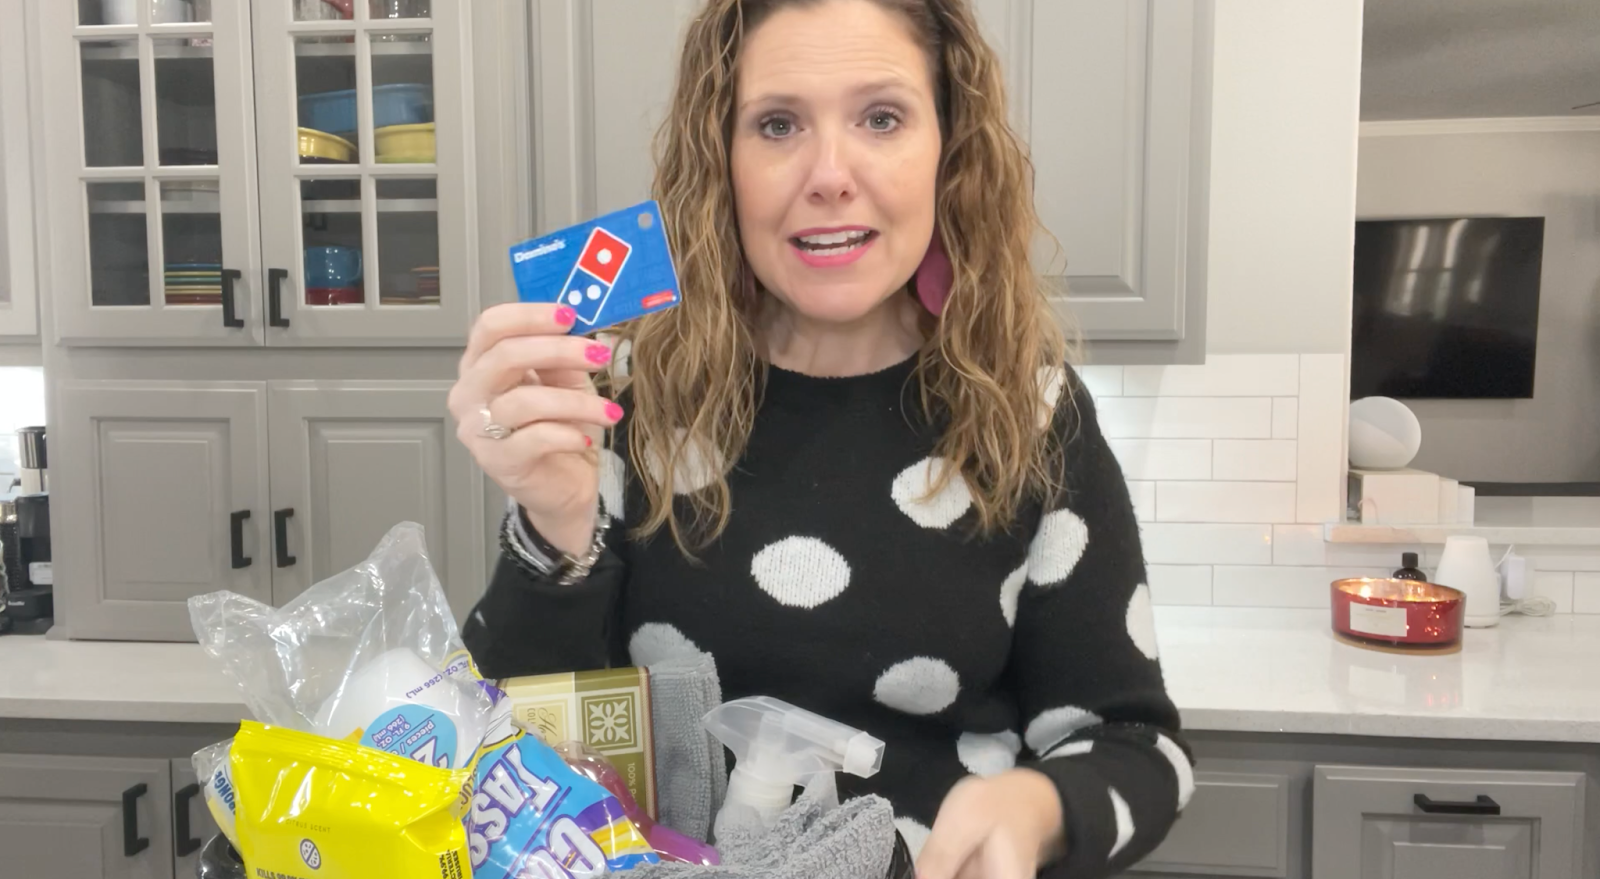 Lindsay holding a Domino's Pizza gift card